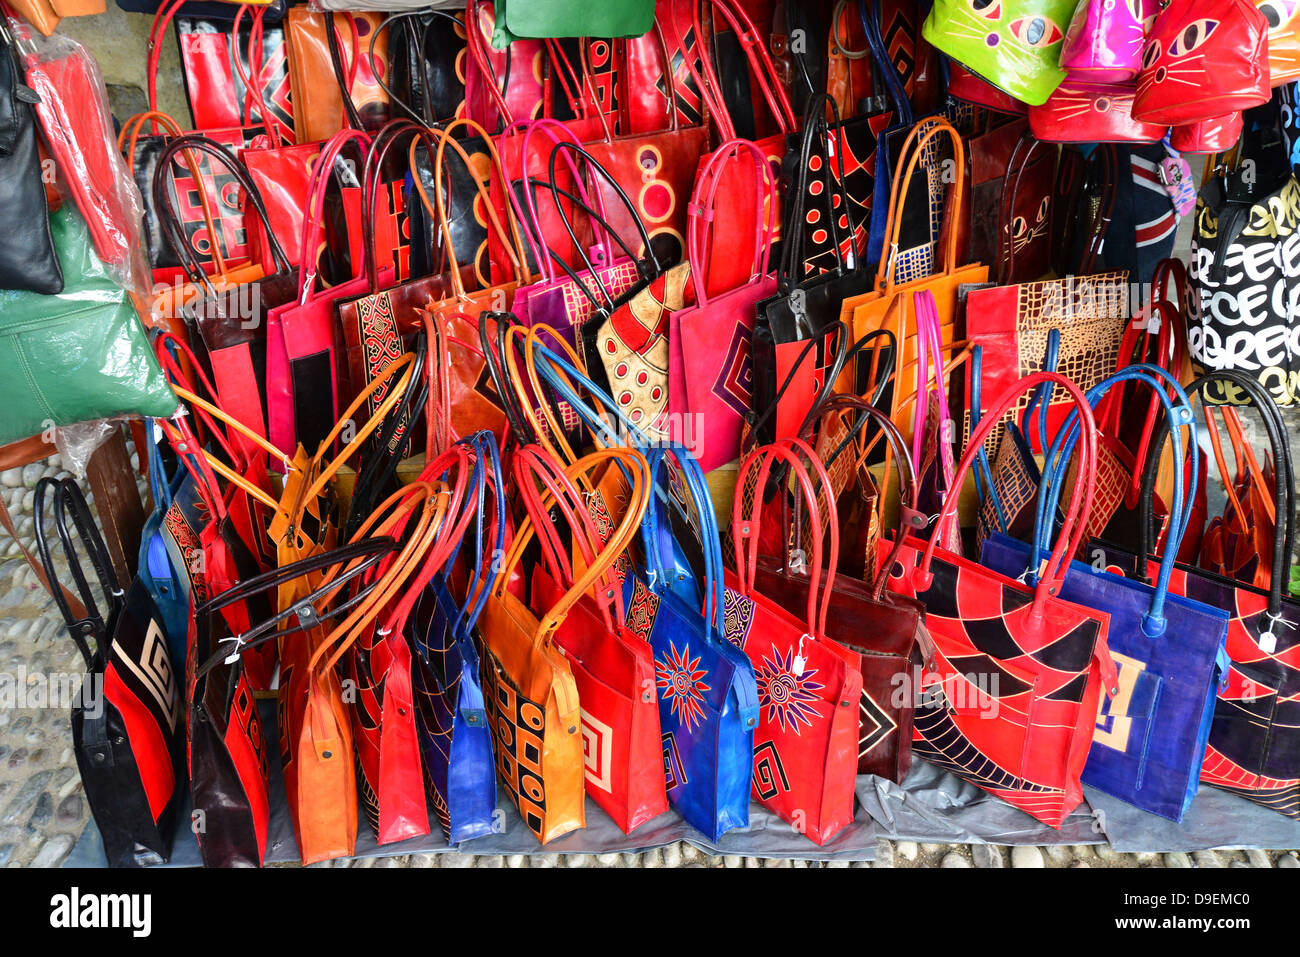 Leather handbags on display outside shop, Old Town, City of Rhodes, Rhodes (Rodos), The Dodecanese, South Aegean Region, Greece Stock Photo